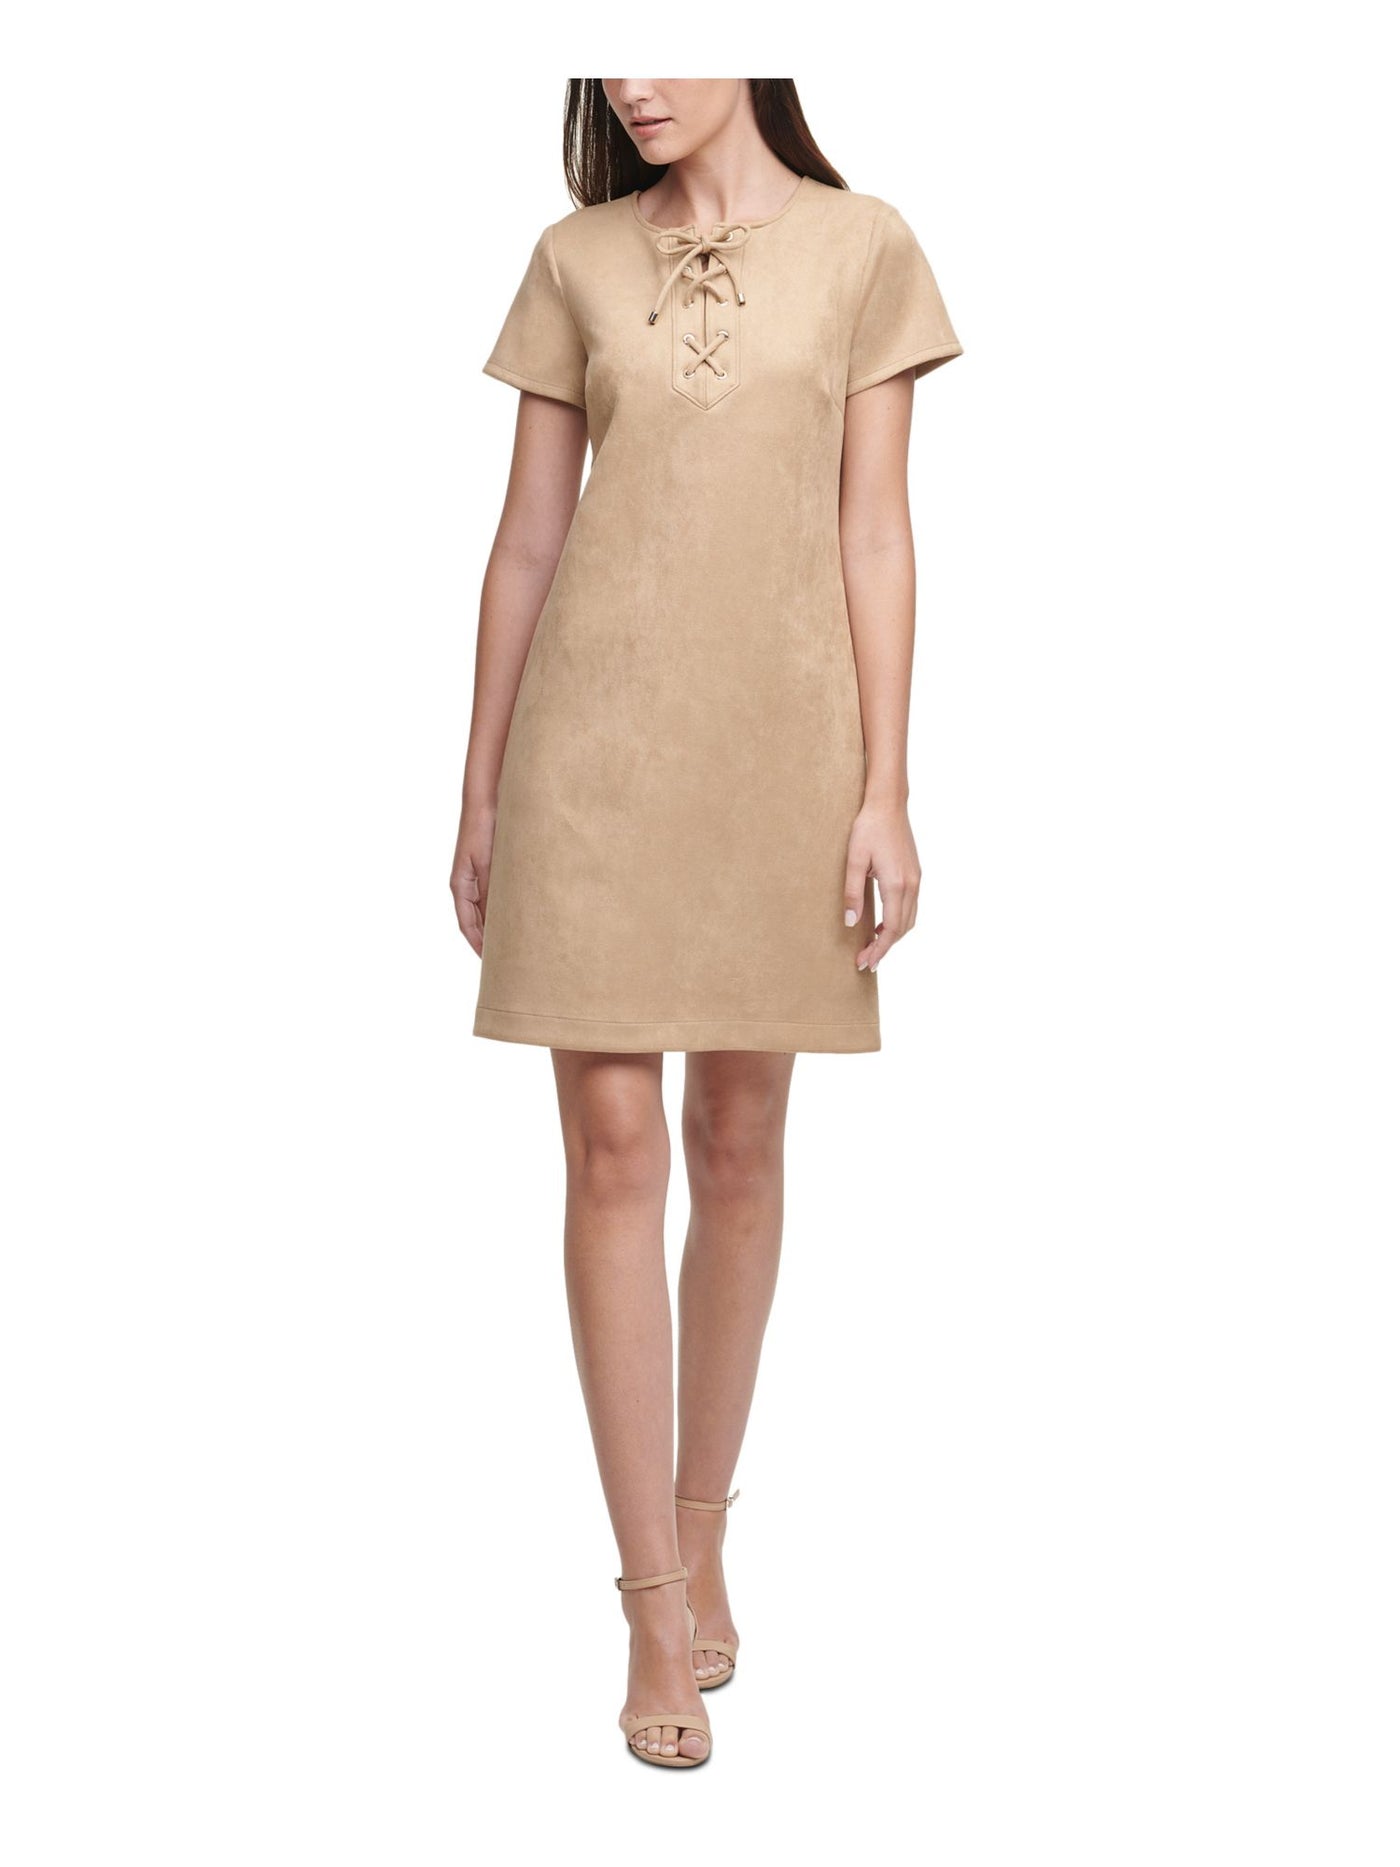 TOMMY HILFIGER Womens Beige Faux Suede Short Sleeve Jewel Neck Above The Knee Shift Dress 12